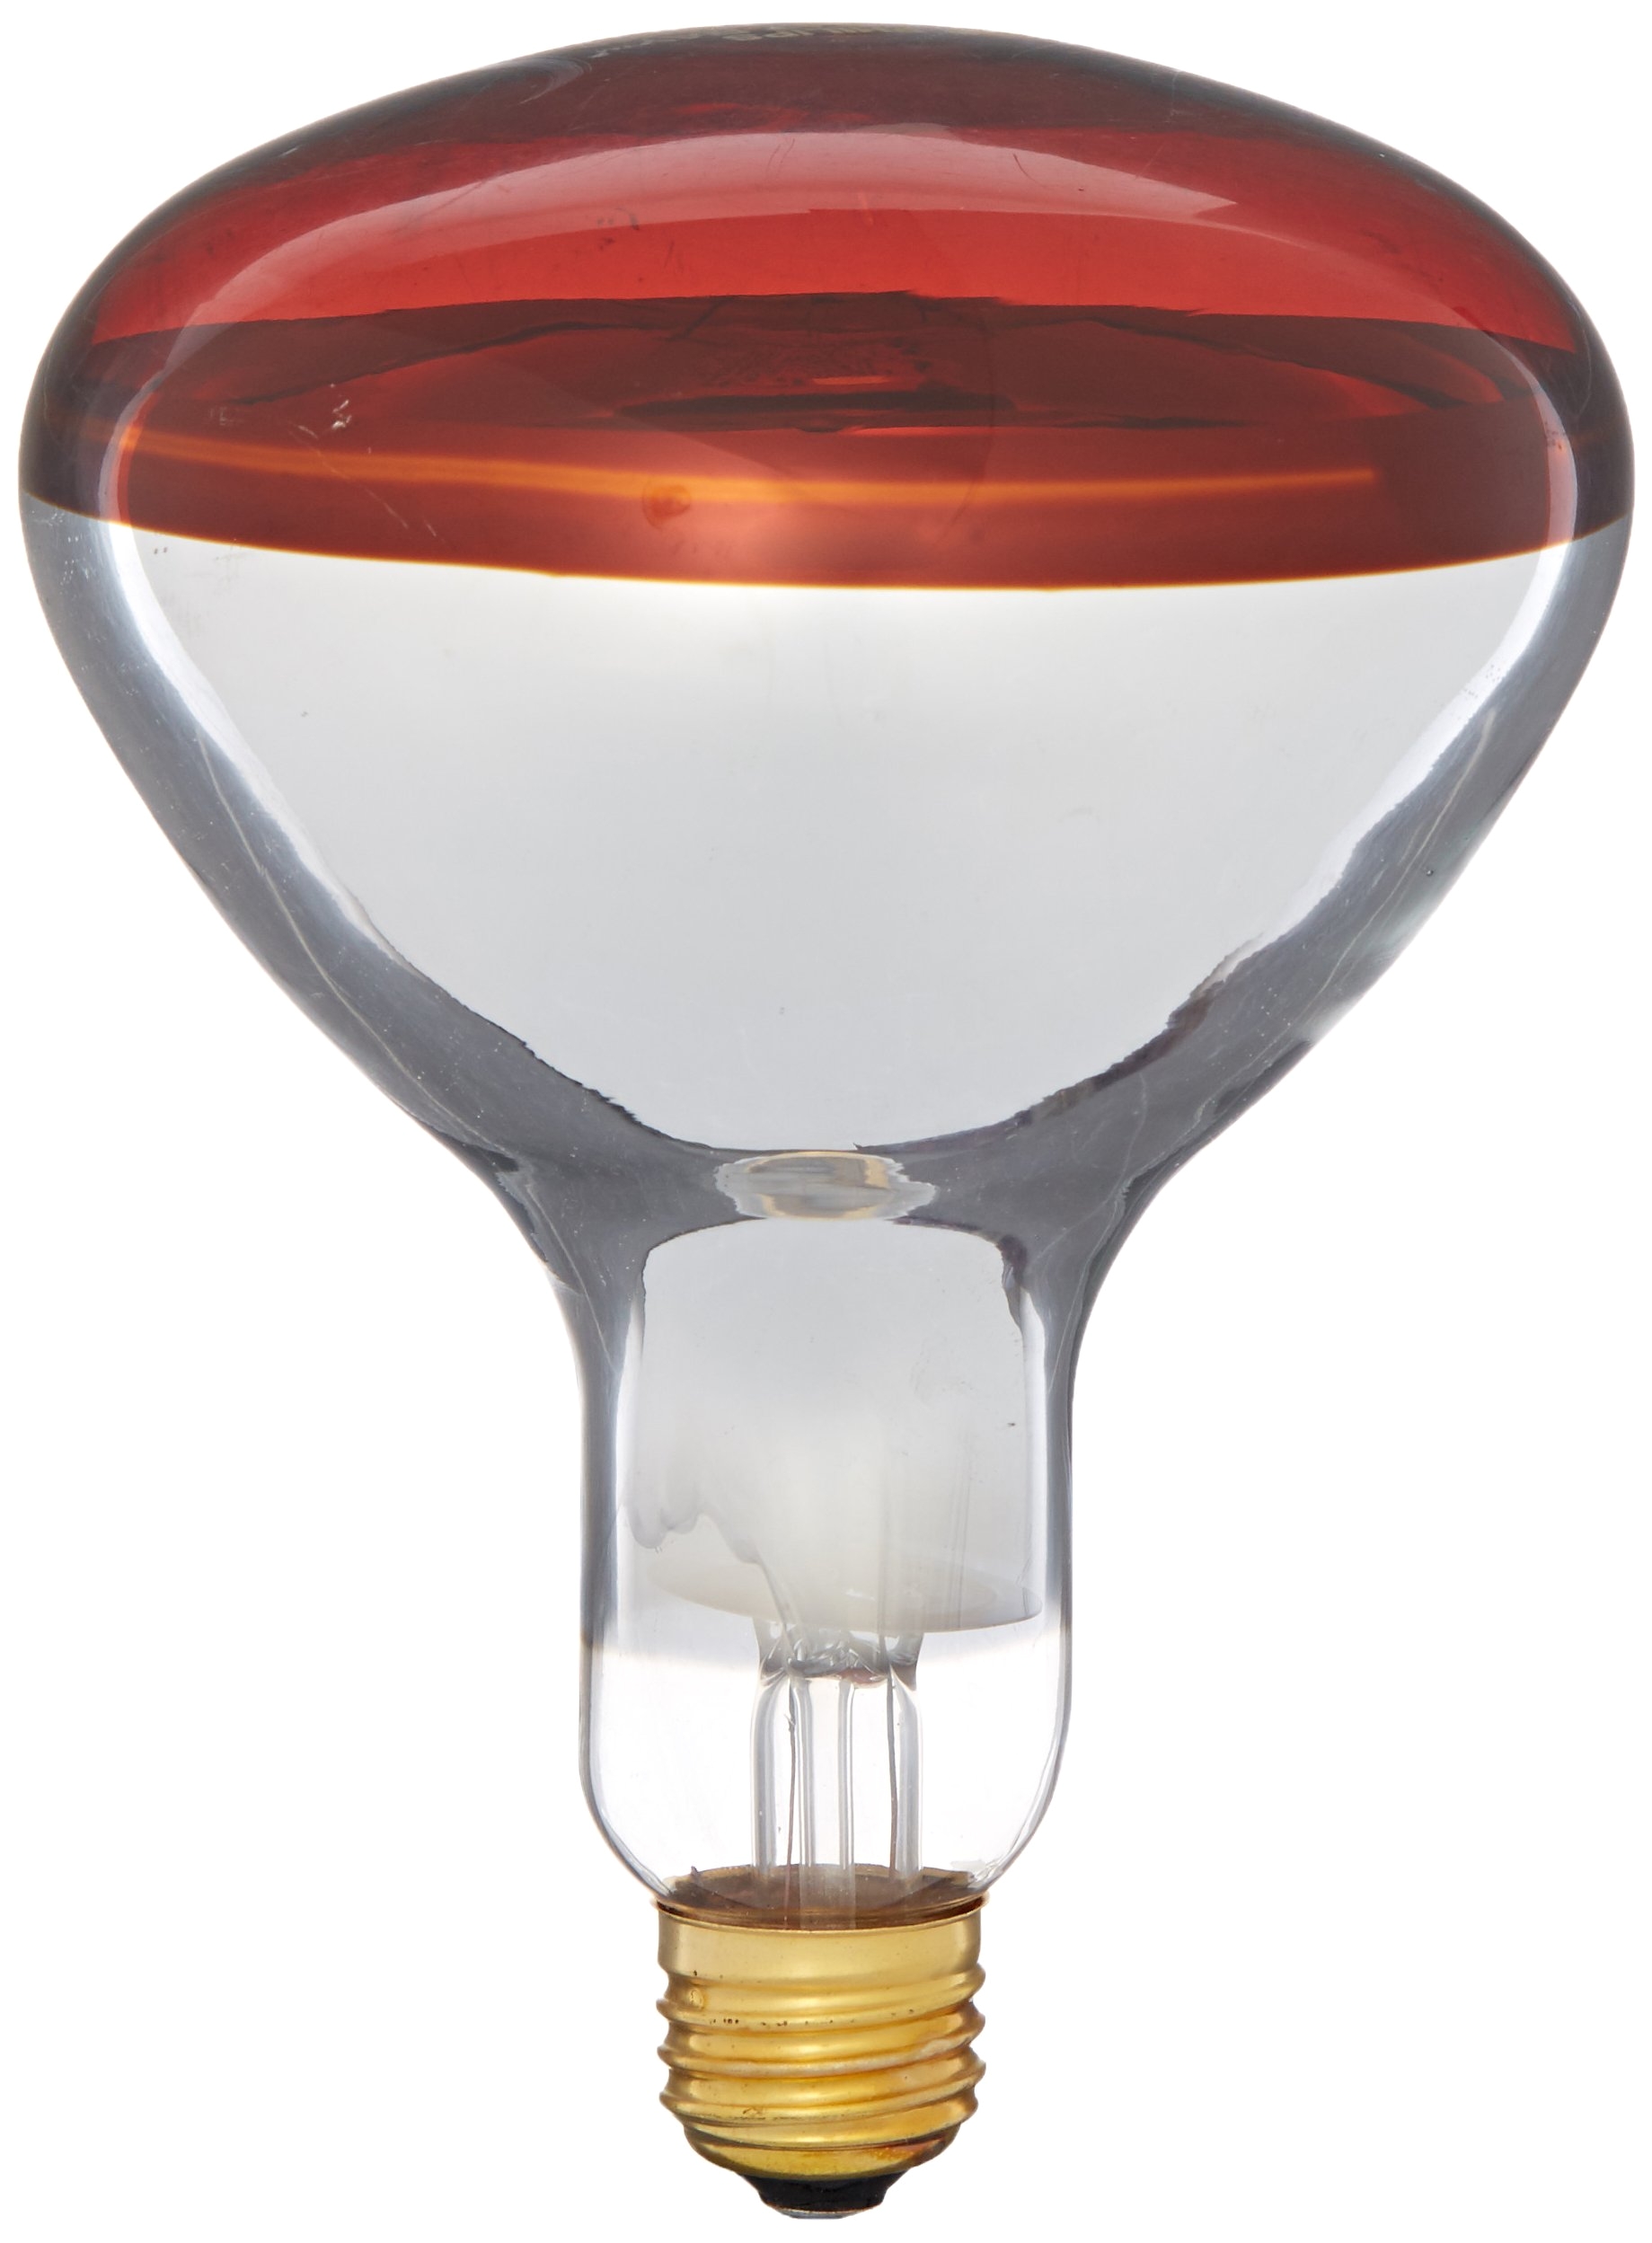 Food Heat Lamp Rental Amazon Com Shengyu Infrared Lamp with Articulated Arm and Wheels